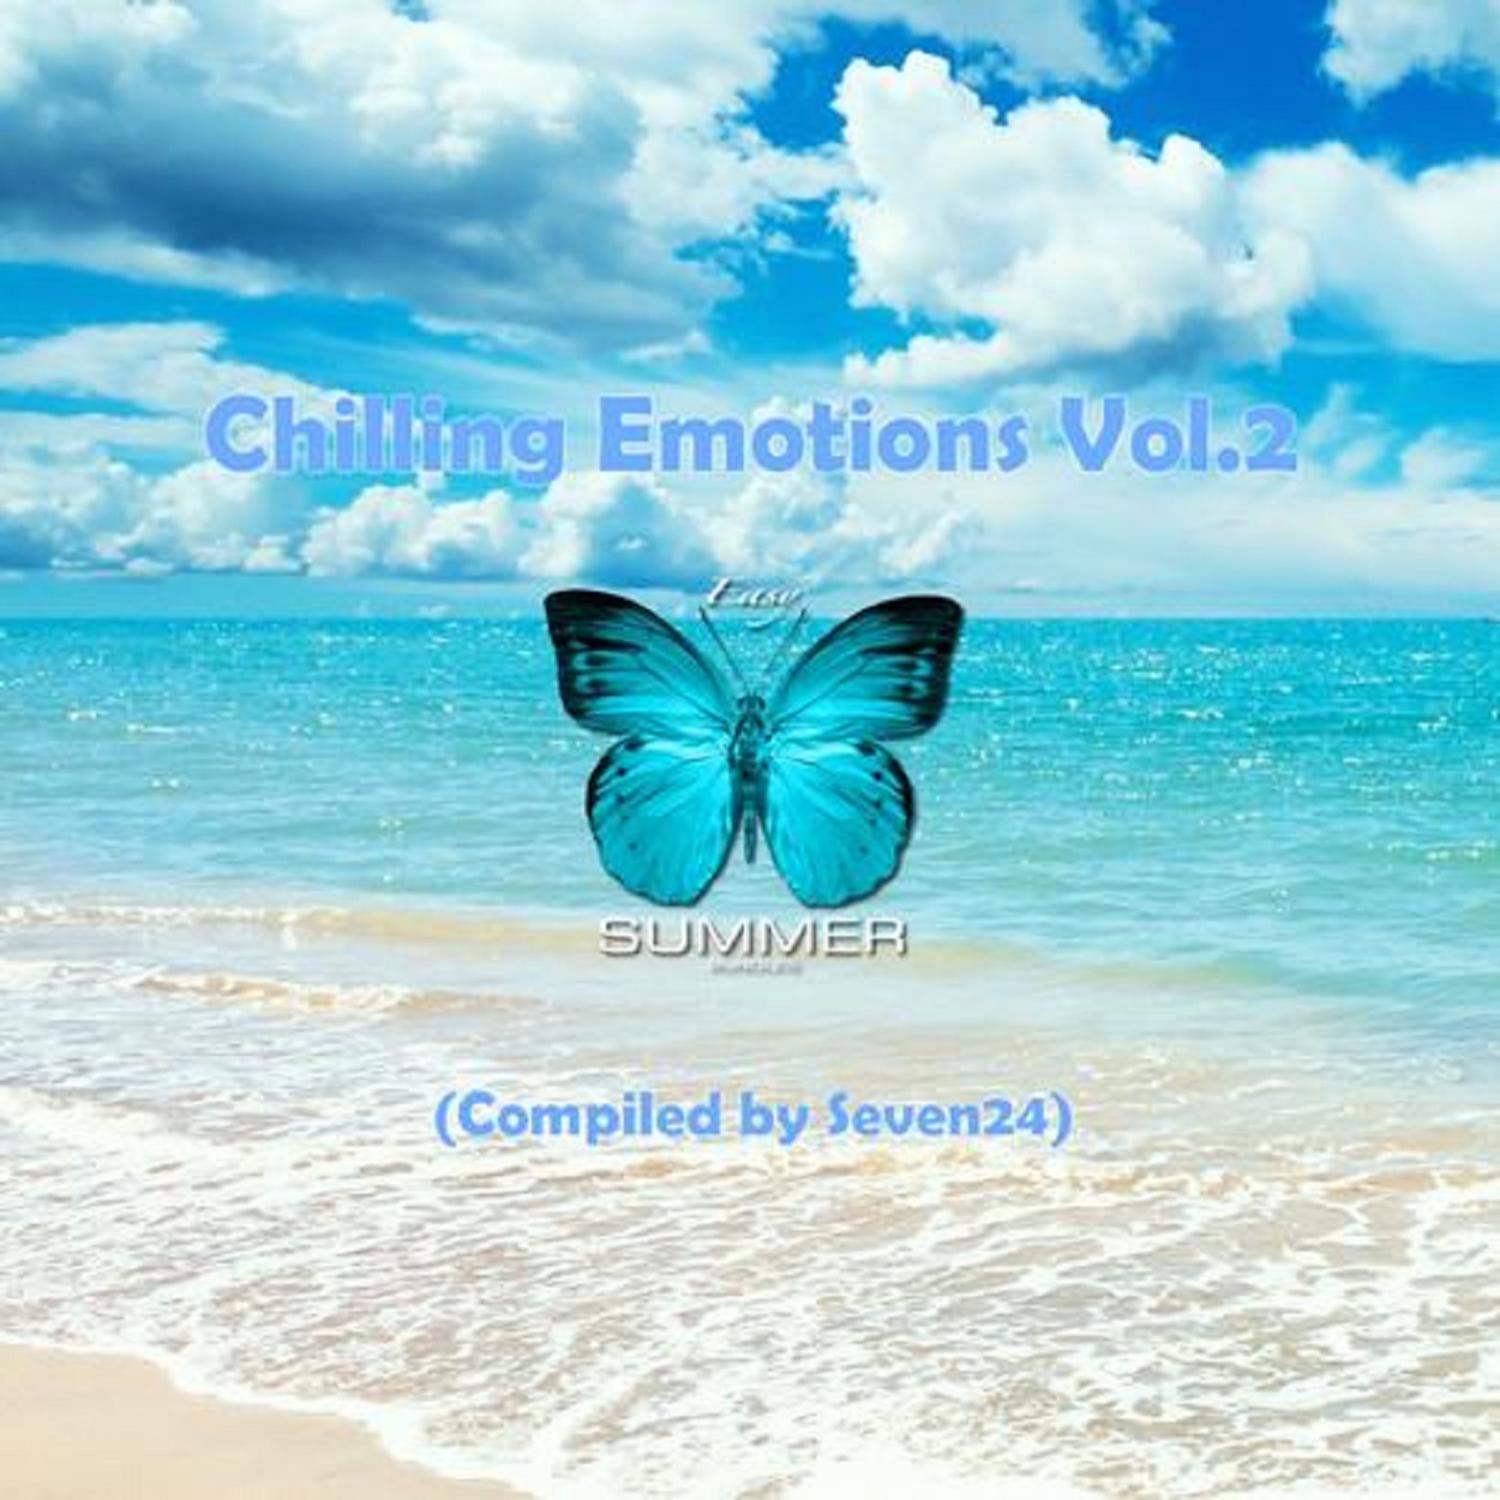 Music For Chilling Emotions, Vol. 2